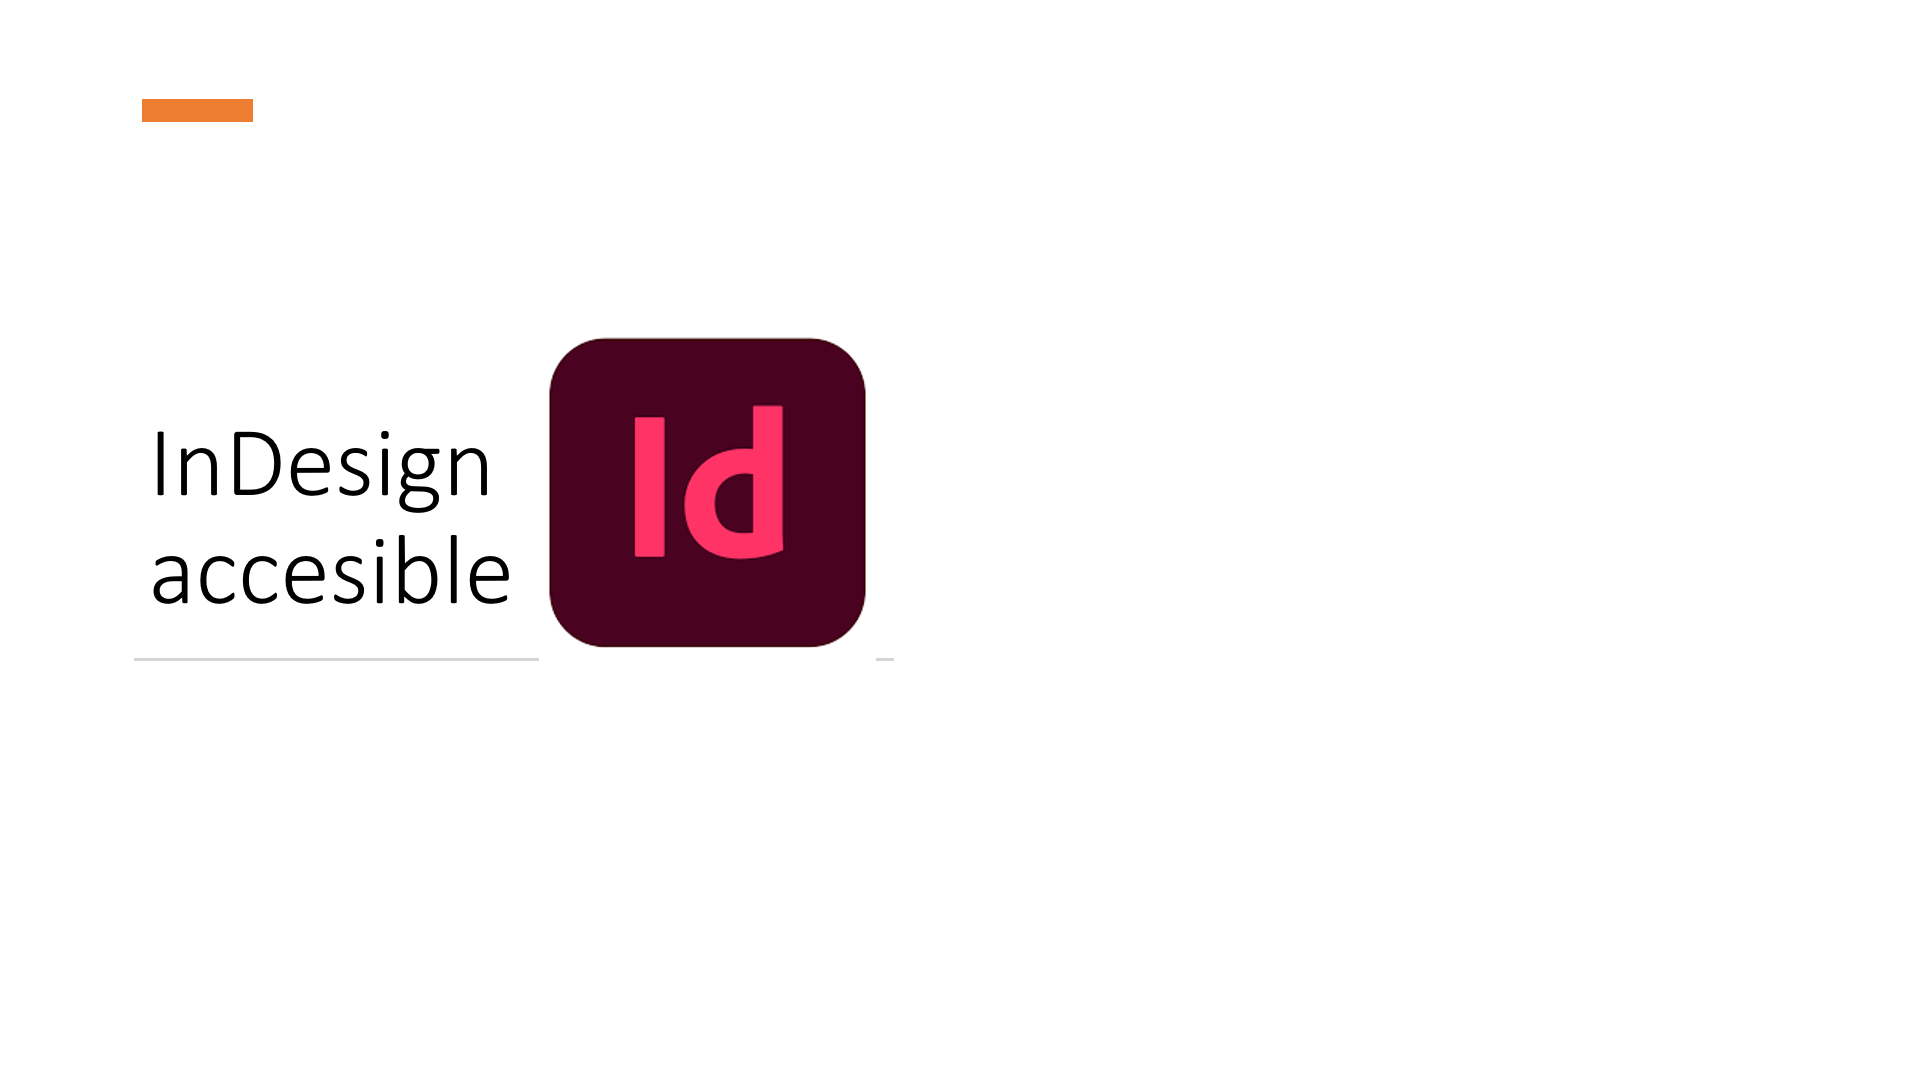 Indesign accesible